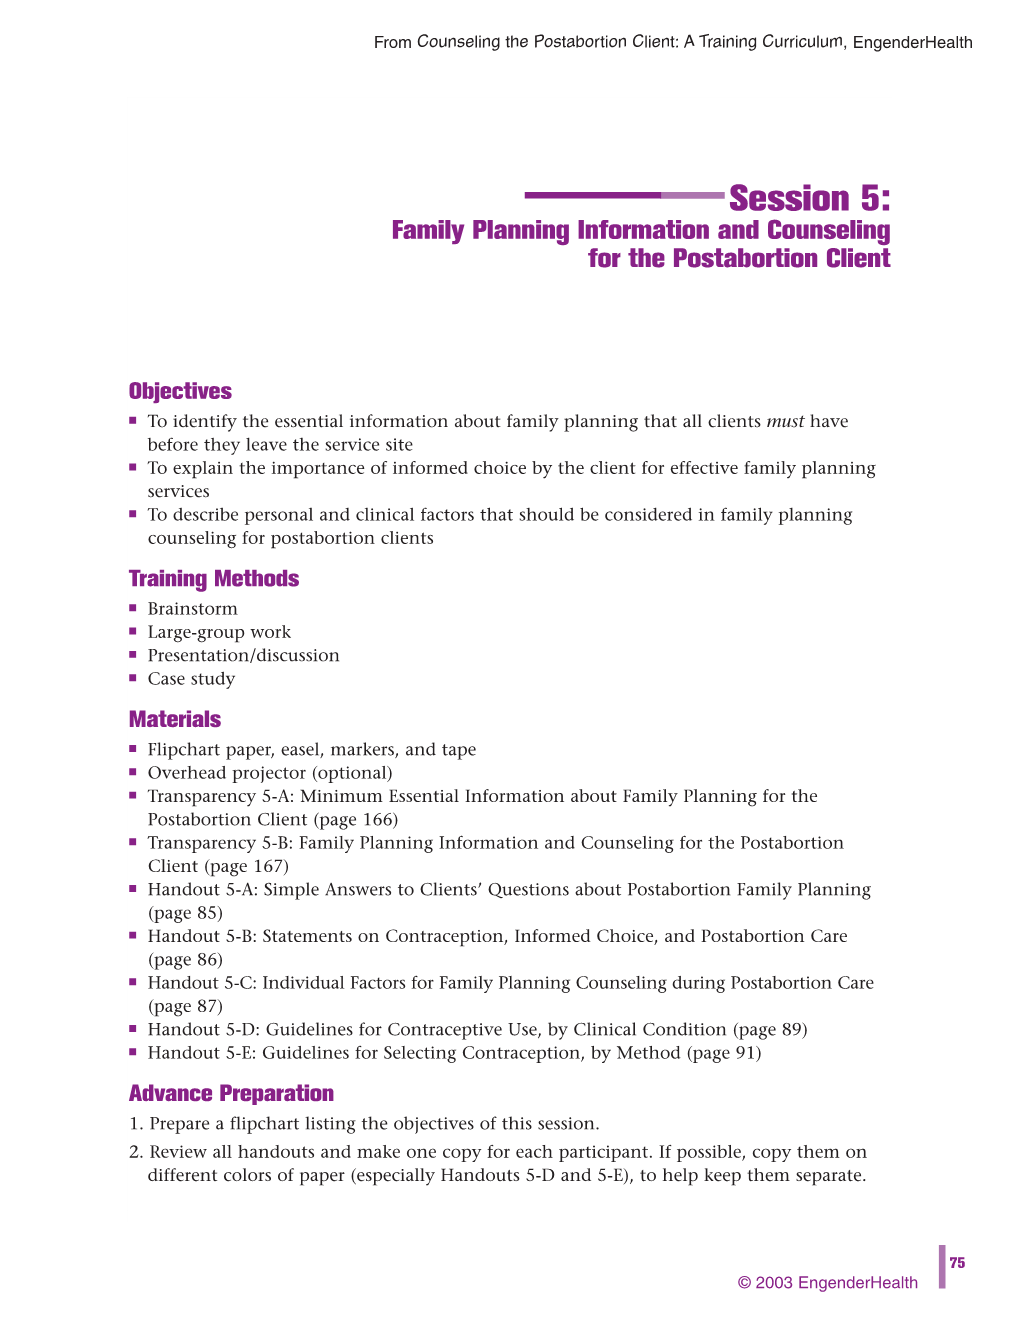 Session 5: Family Planning Information and Counseling for the Postabortion Client